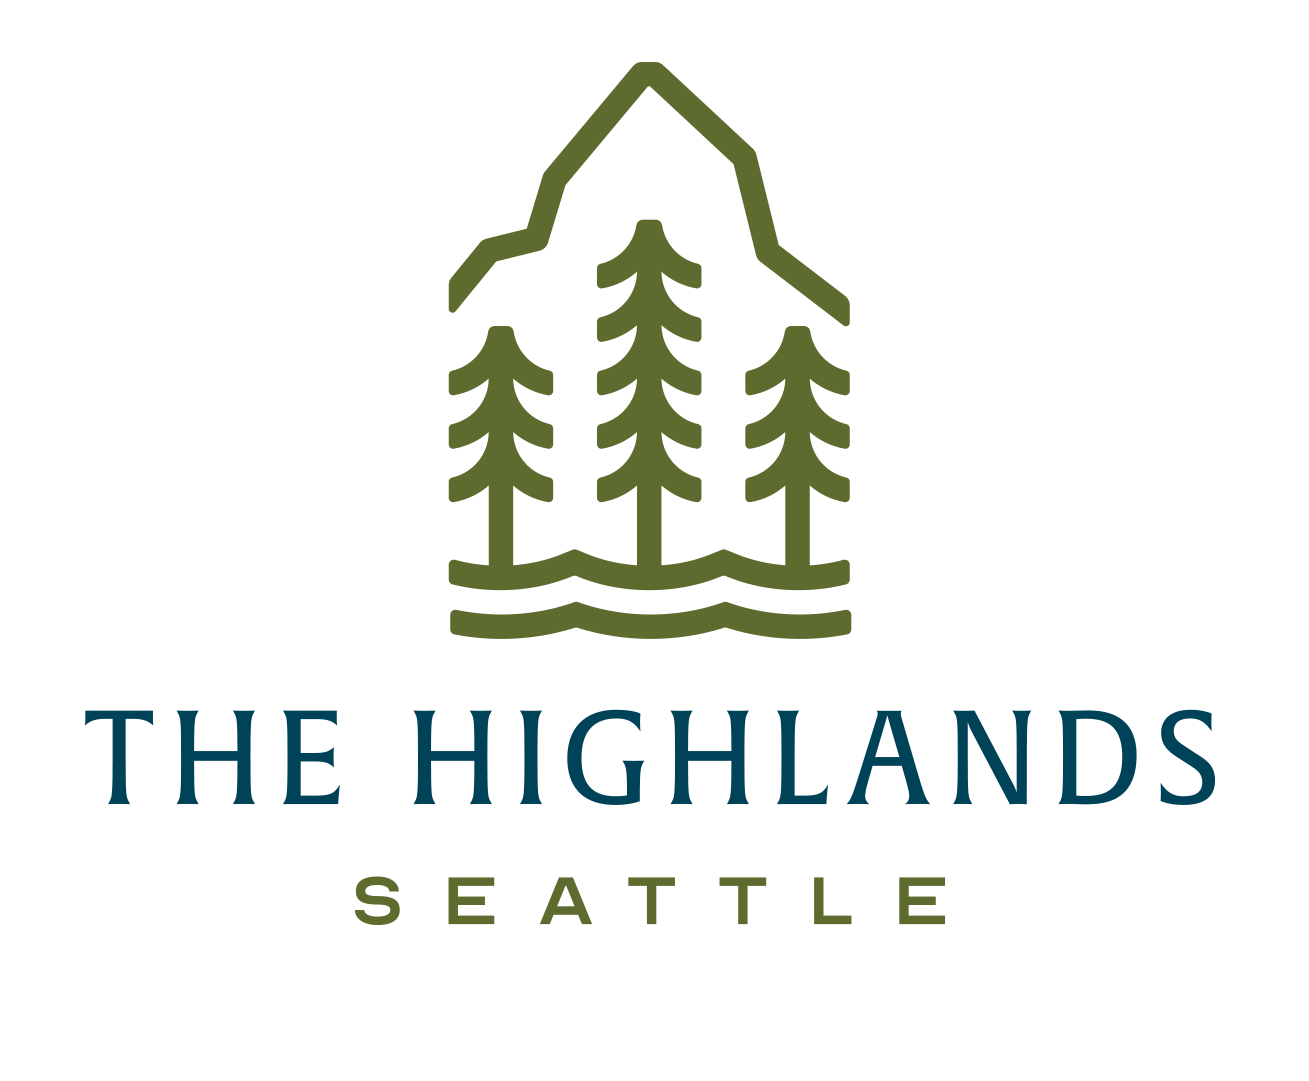 THE HIGHLANDS  SEATTLE